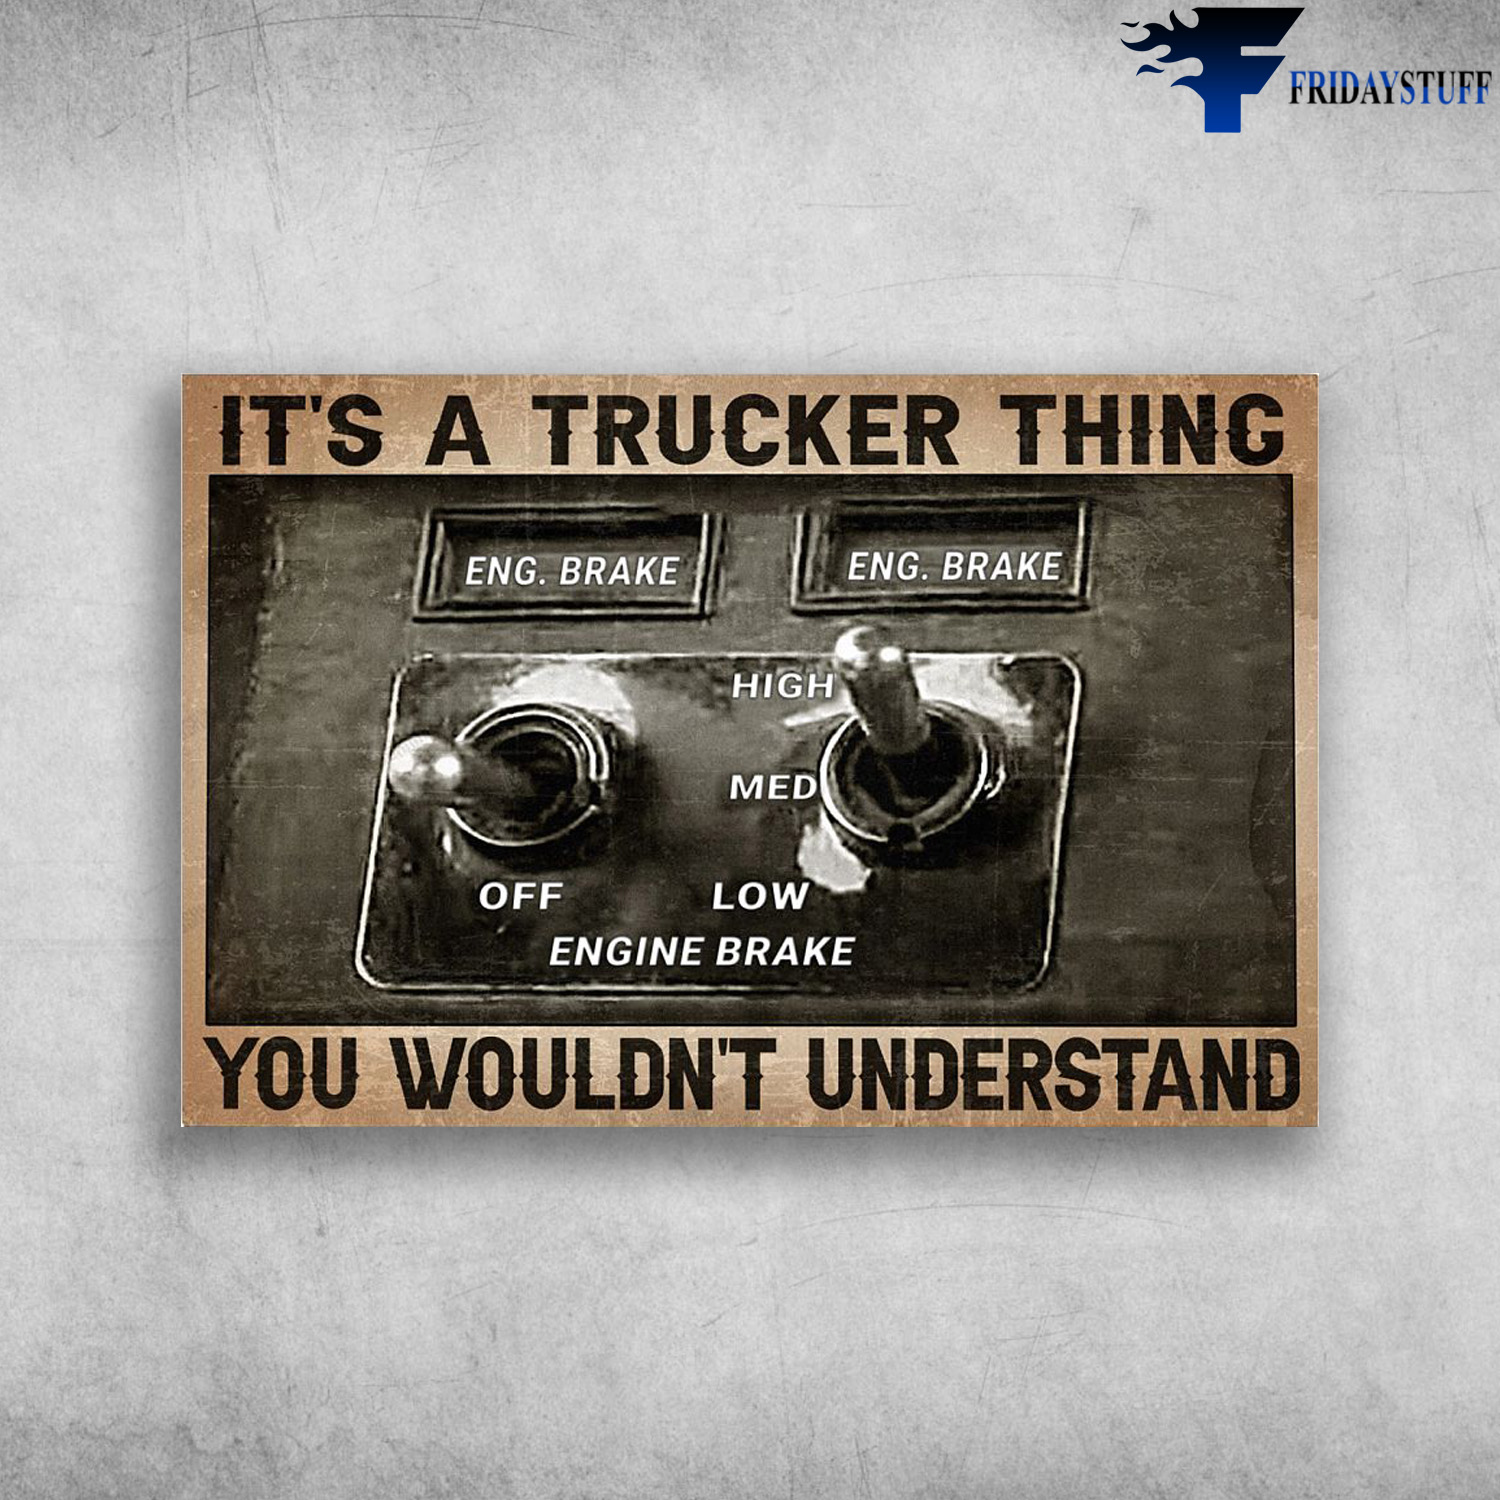 The Truck Button - It's A Trucker Thing, You Wouldn't Understand